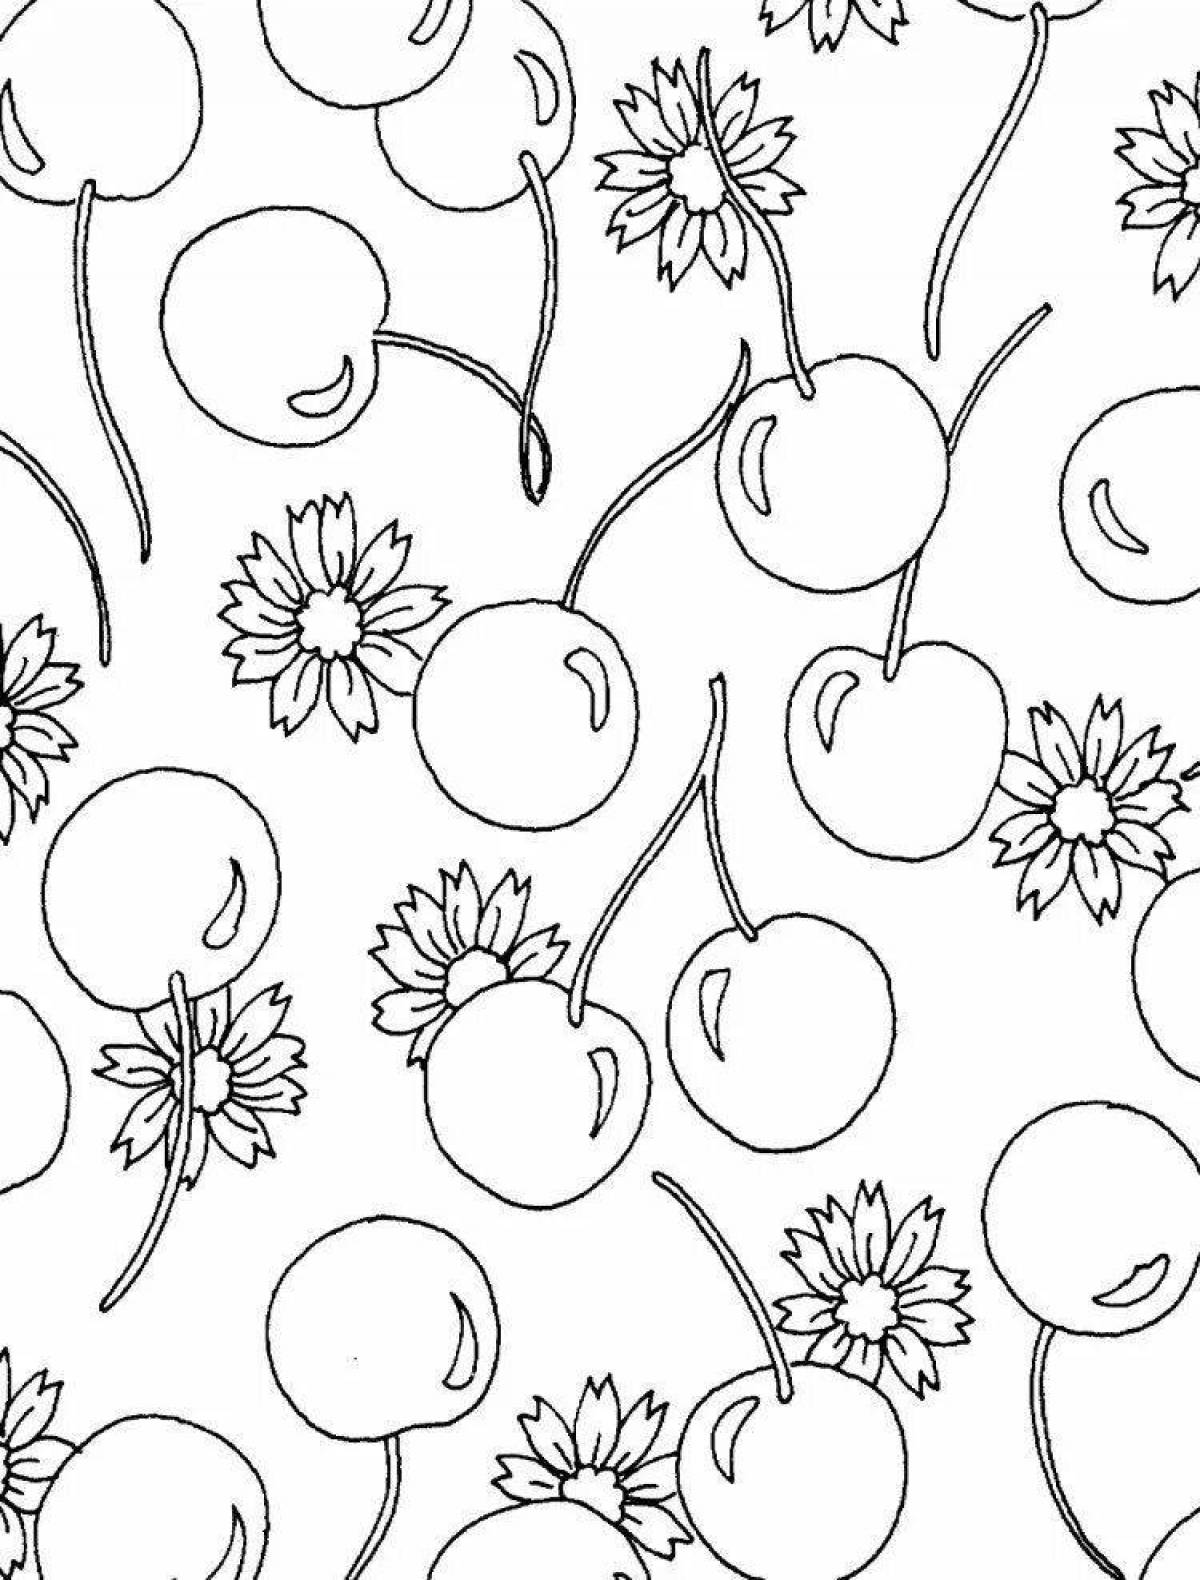 Trendy phone wallpaper coloring page